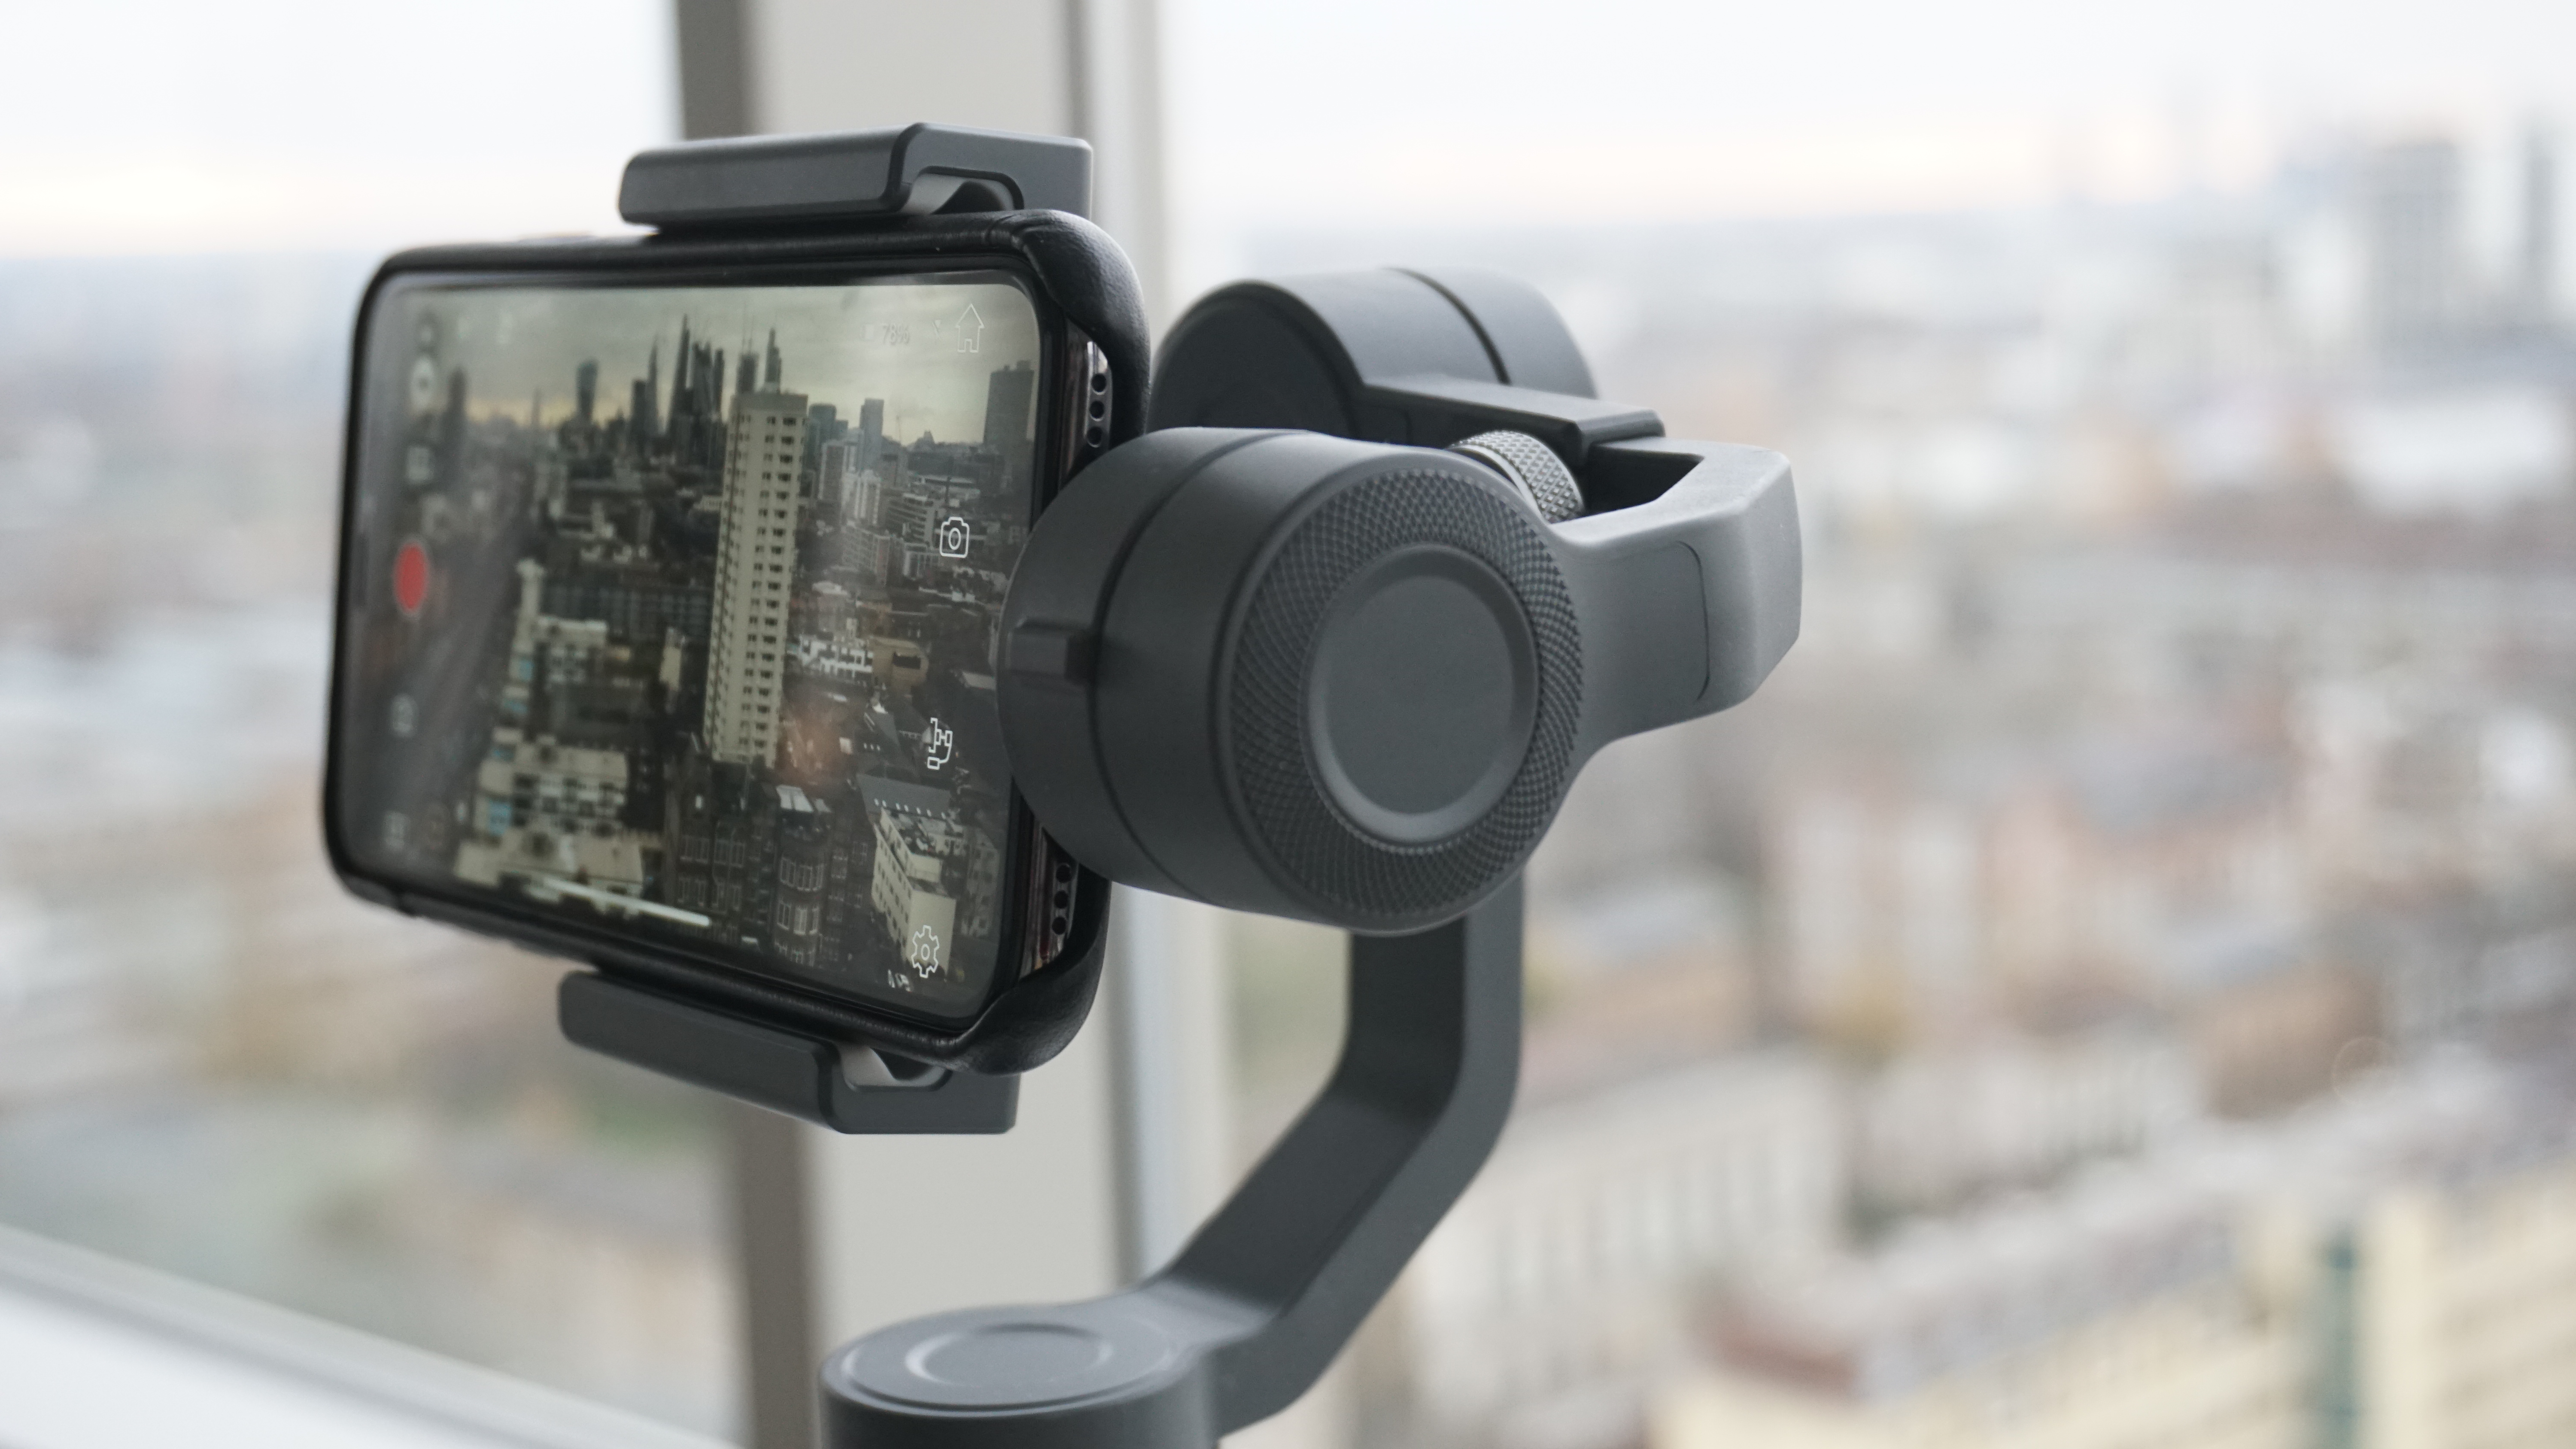 Review: The DJI Osmo Mobile 2 is the best-value iPhone gadget available right now [Video]